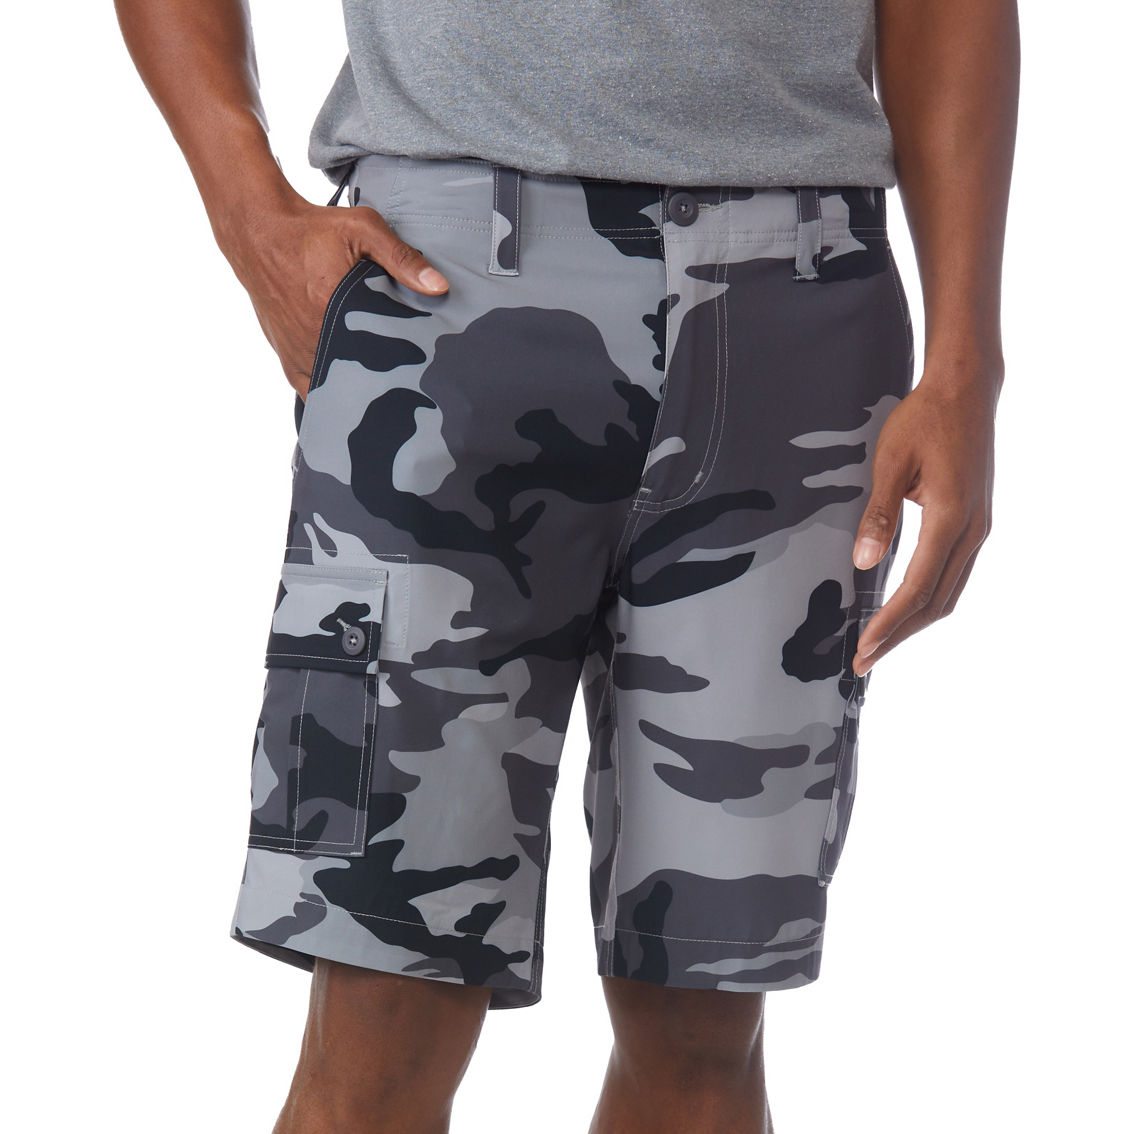 Wearfirst Stretch Poly Spandex Camo Cargo Shorts | Shorts | Clothing ...